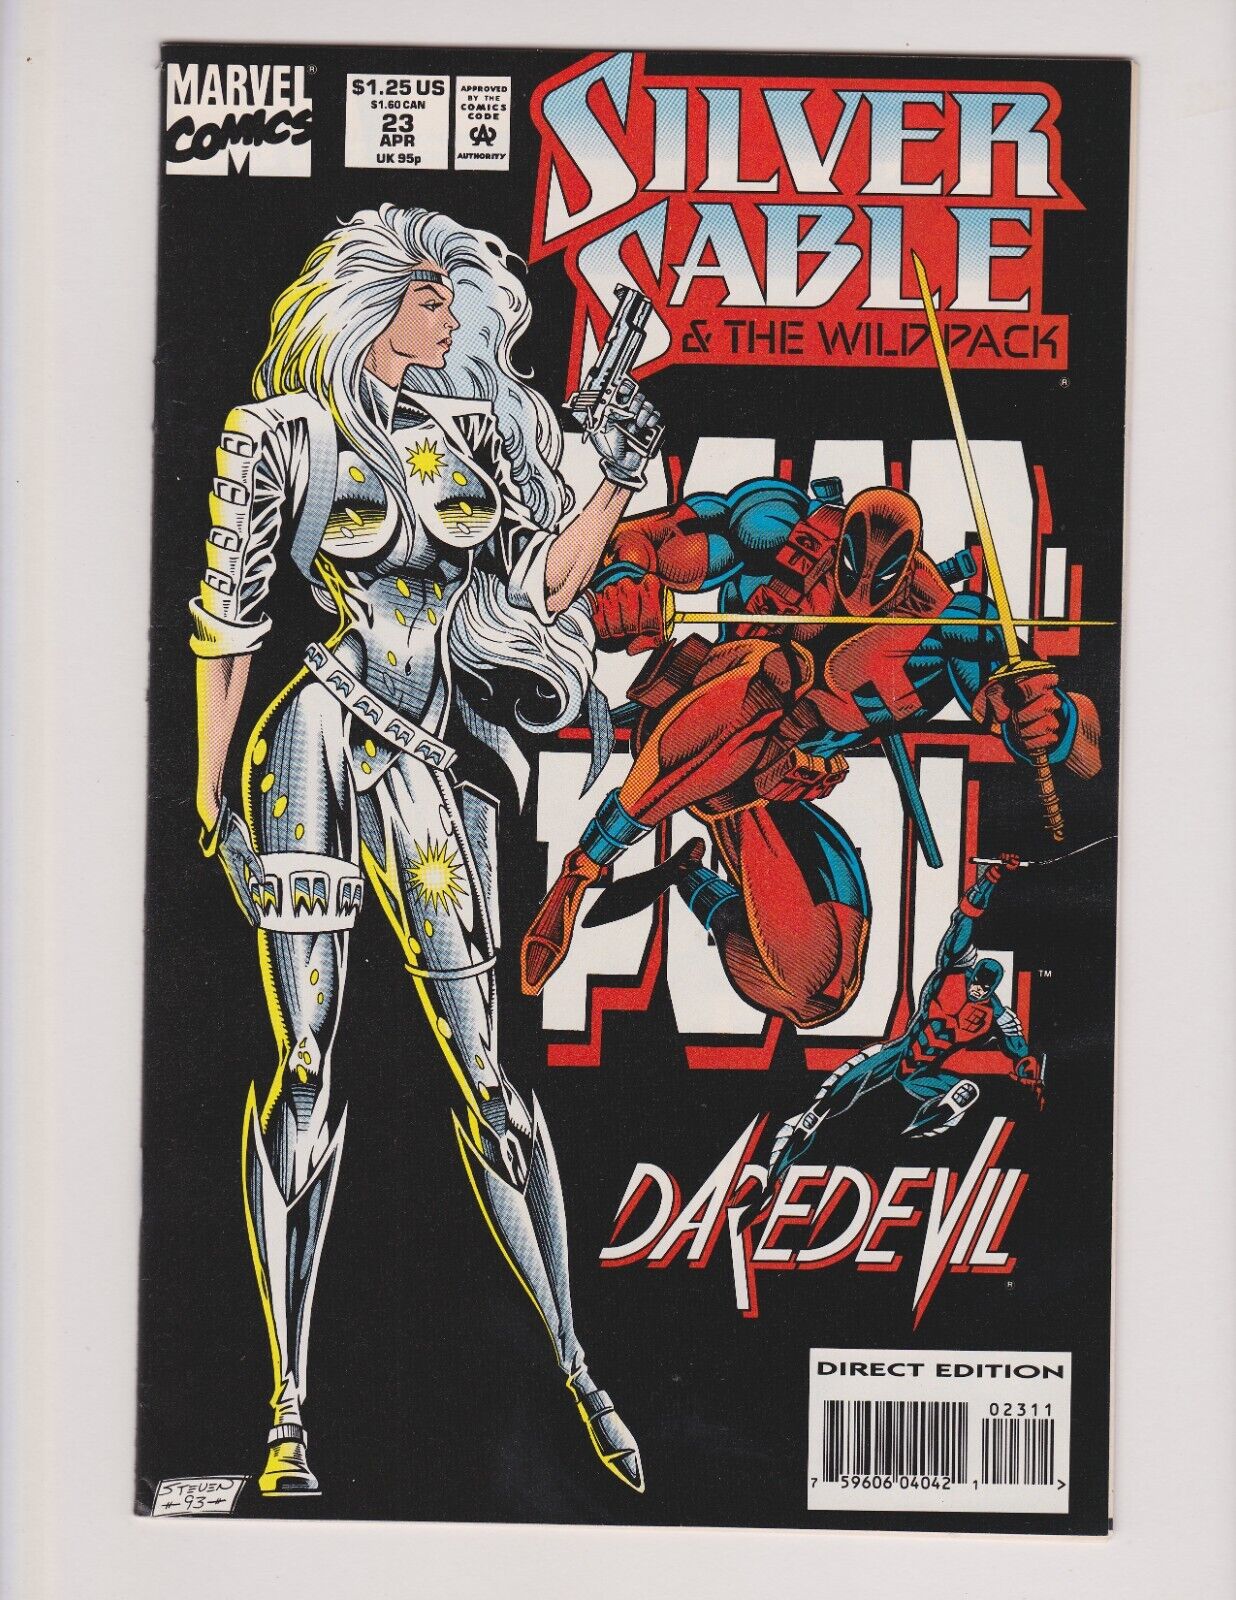 SILVER SABLE & THE WOLF PACK #23 MARVEL 1992 EARLY COVER APPEARANCE OF DEADPOOL